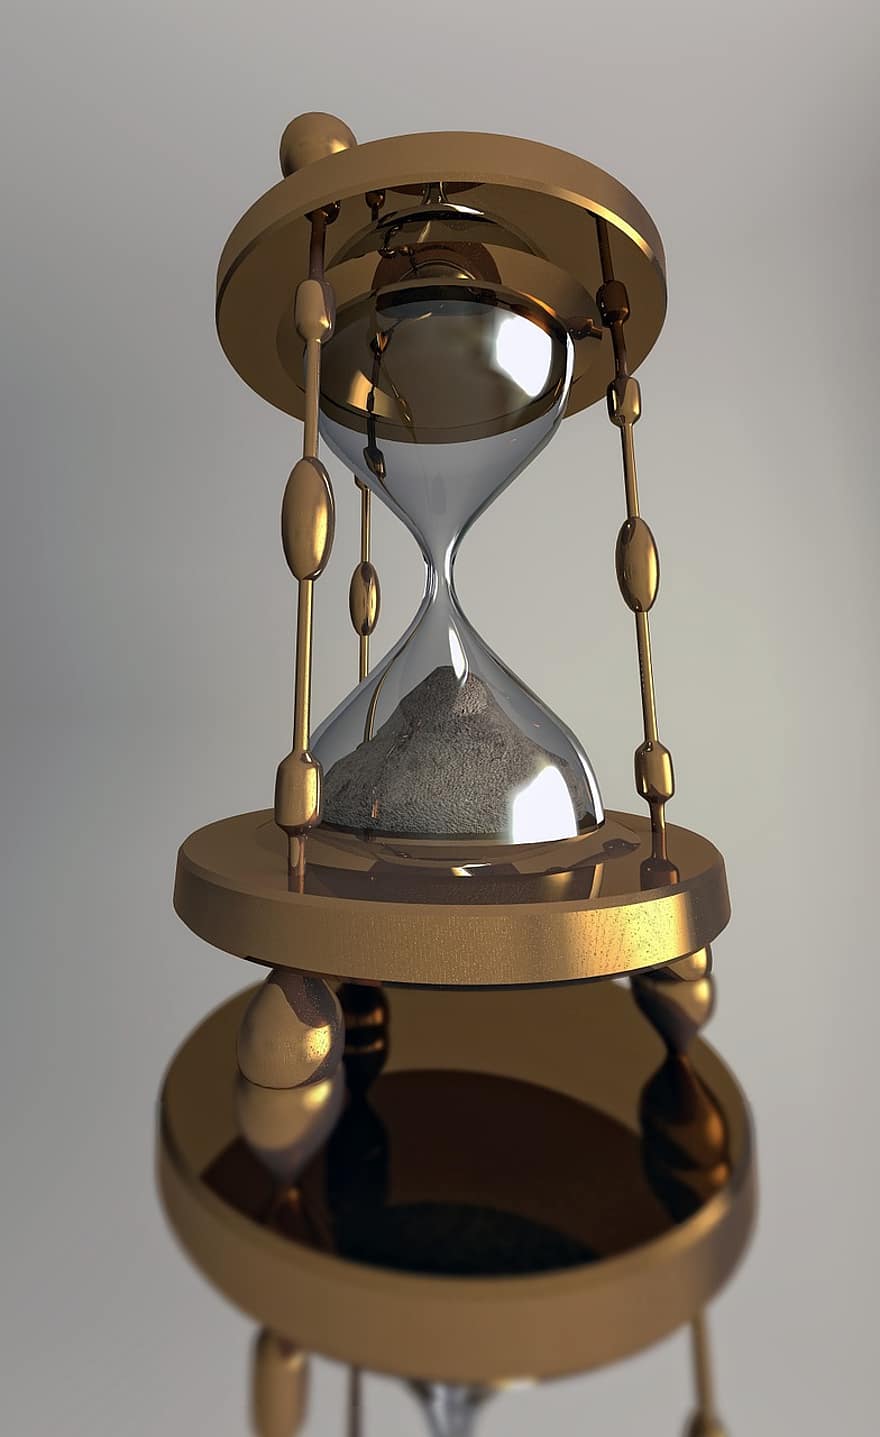 Hourglass, Clock, Brass, Crystal Glass, Time, Second, Minute, Hour, Day, Sand, Run Out